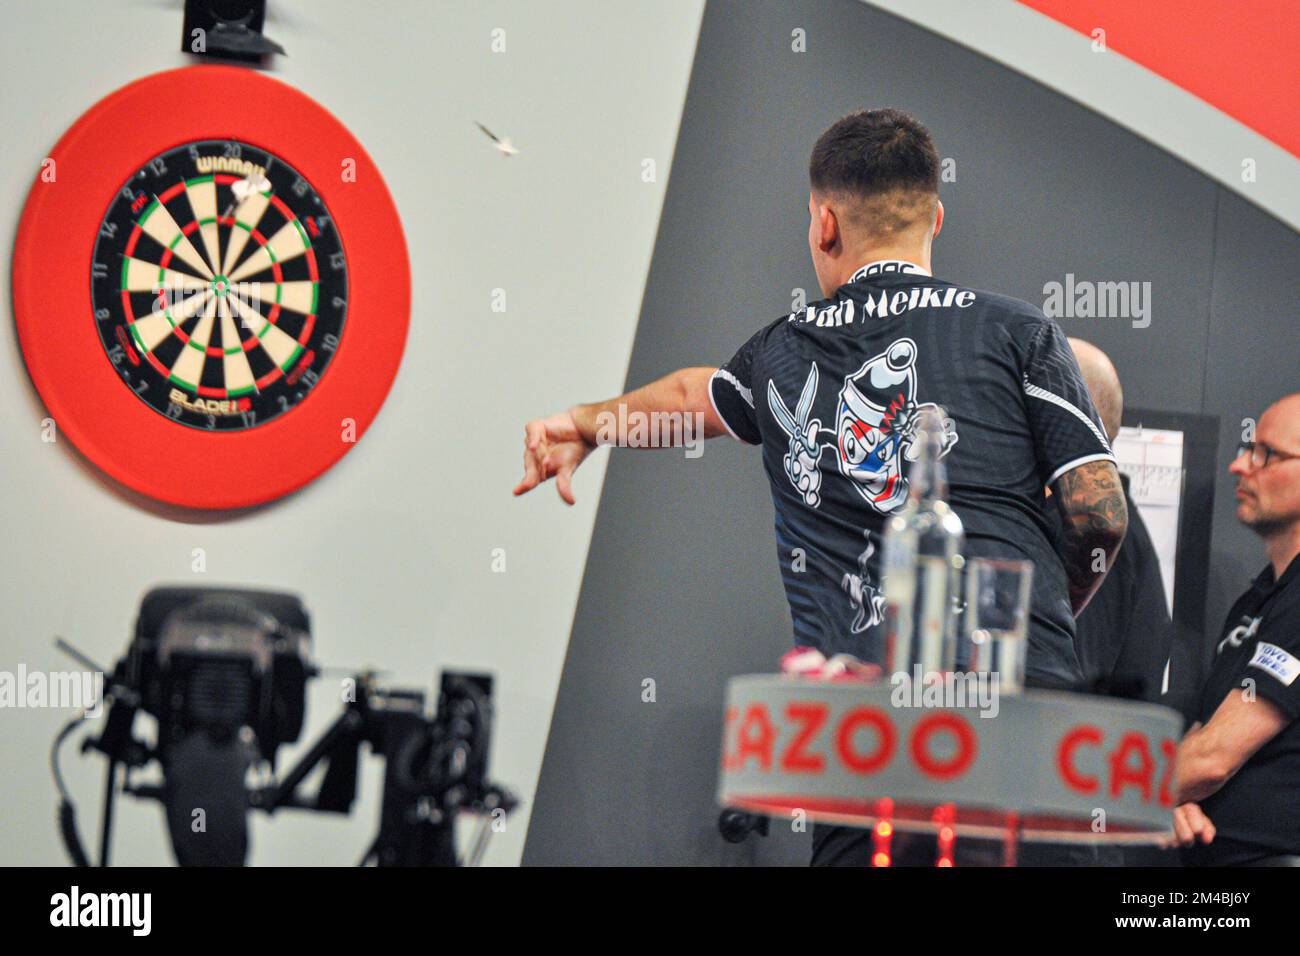 LONDON, UNITED KINGDOM - DECEMBER 17: Ryan Meikle of England in action during his First Round match at the 2022/23 Cazoo World Darts Championship at Alexandra Palace on December 17, 2022 in London, United Kingdom. (Photo by Pieter Verbeek/BSR Agency) Stock Photo